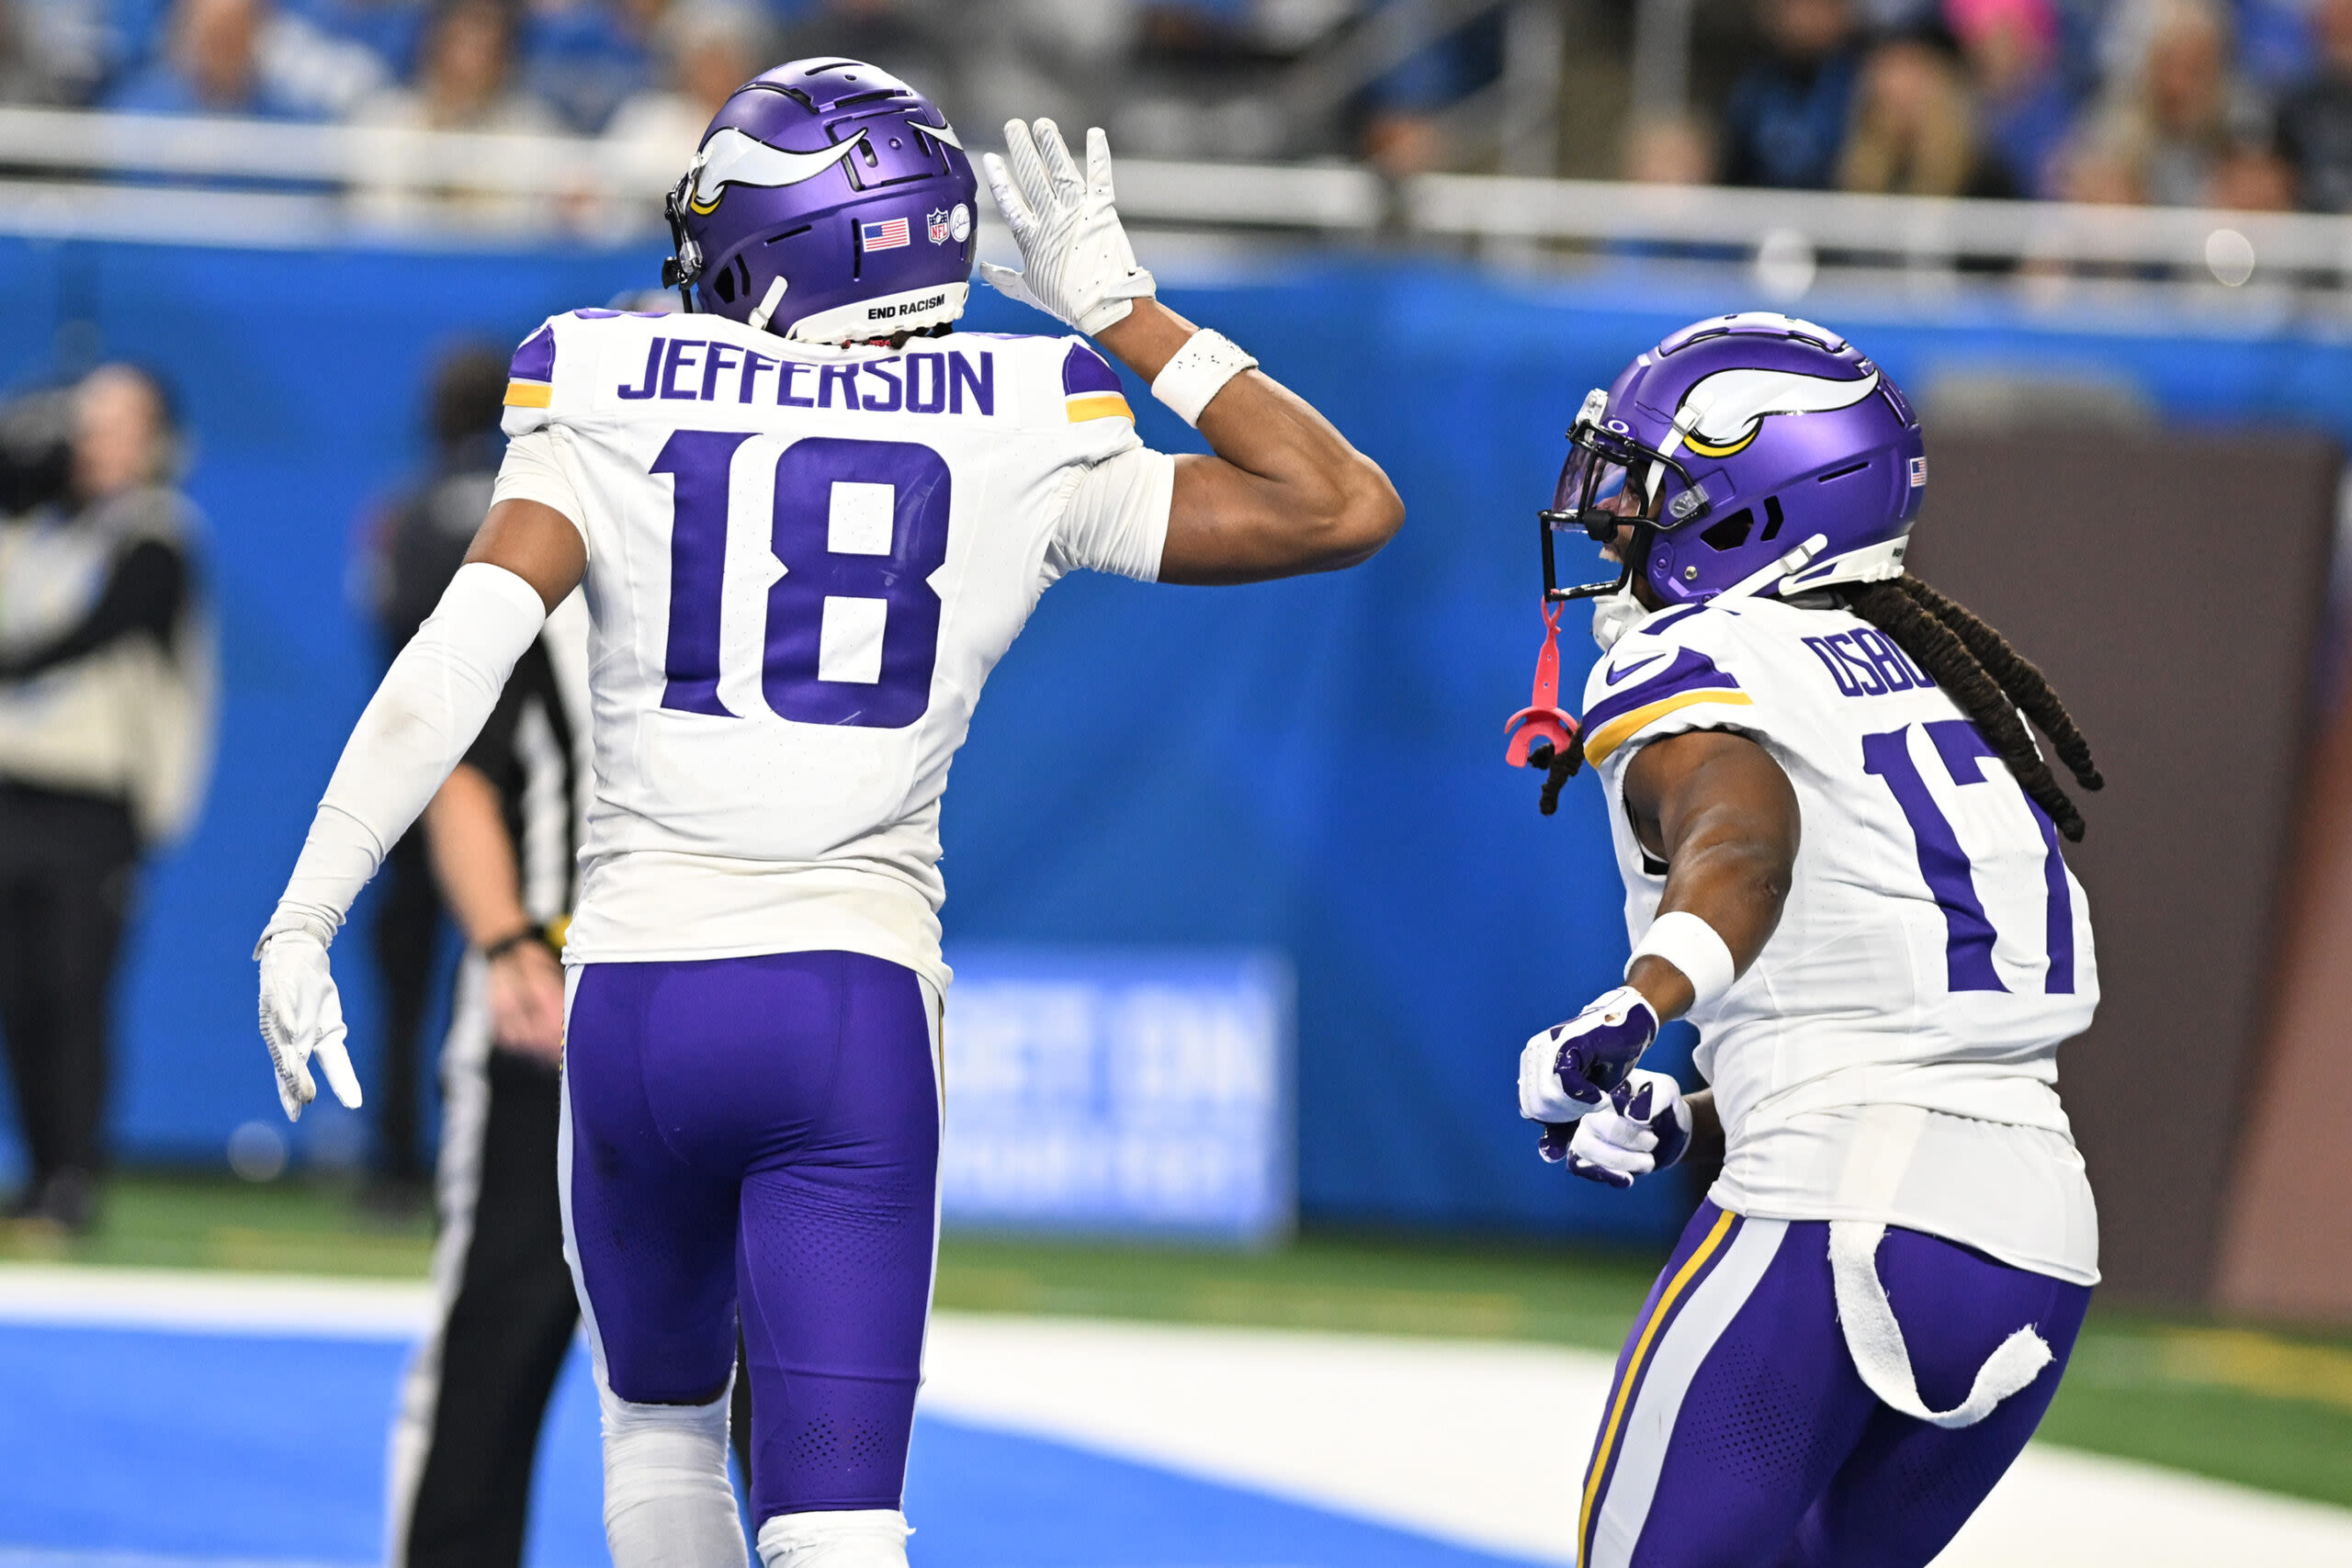 Vikings WR Justin Jefferson resets WR market with massive contract